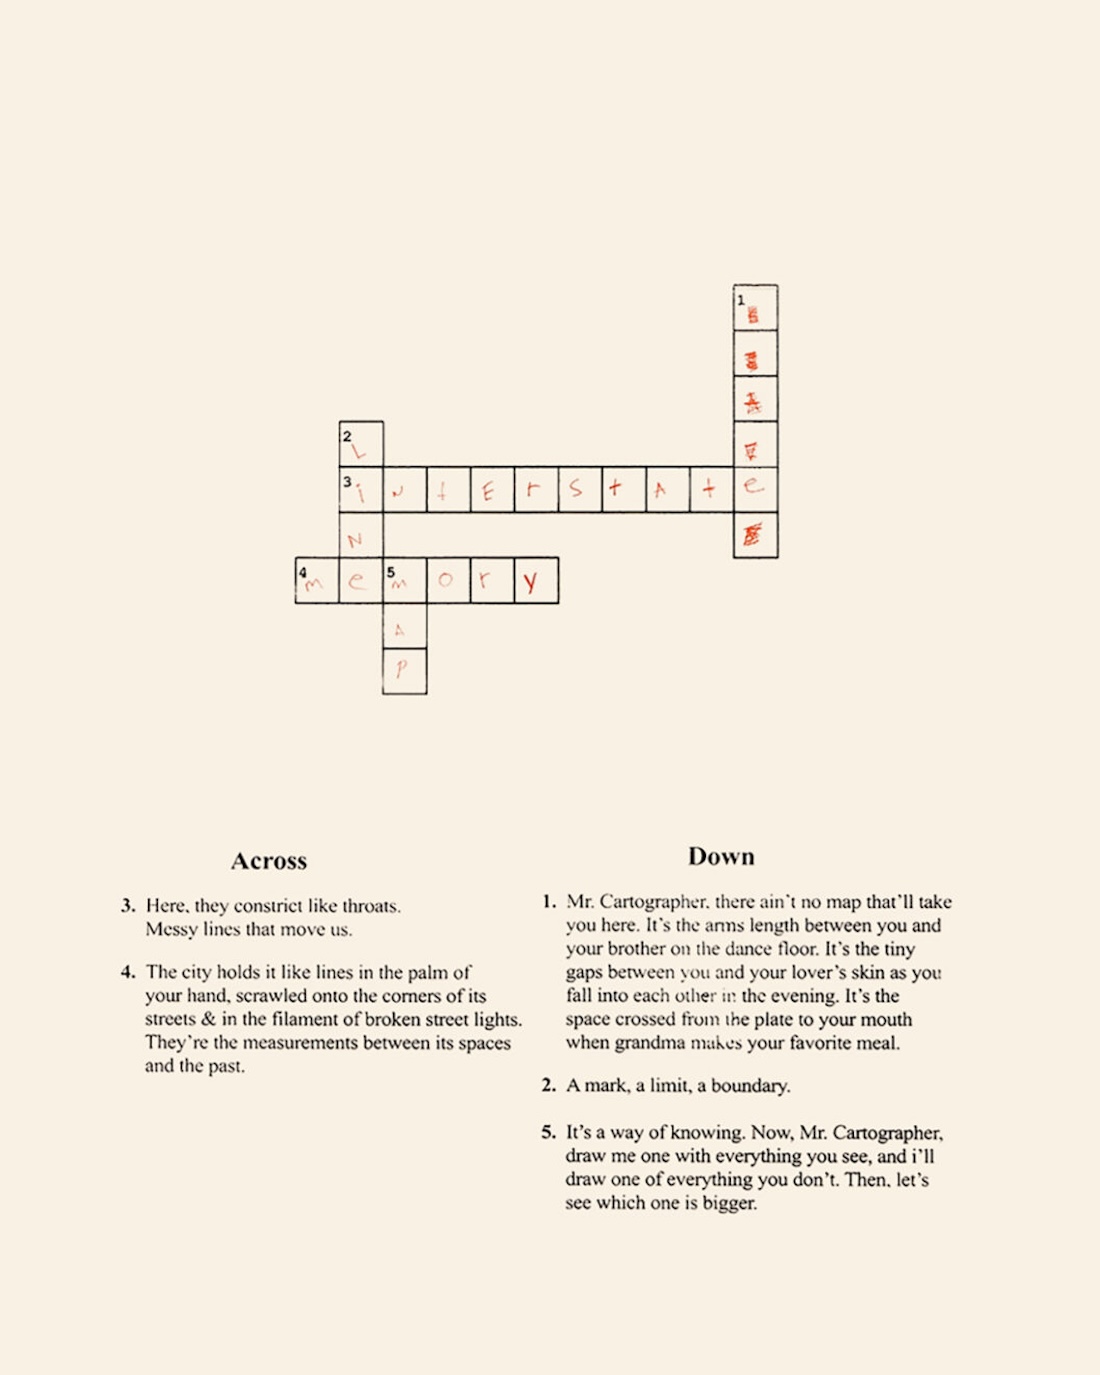 An artist’s print of a crossword puzzle with some clues and some answers filled in.